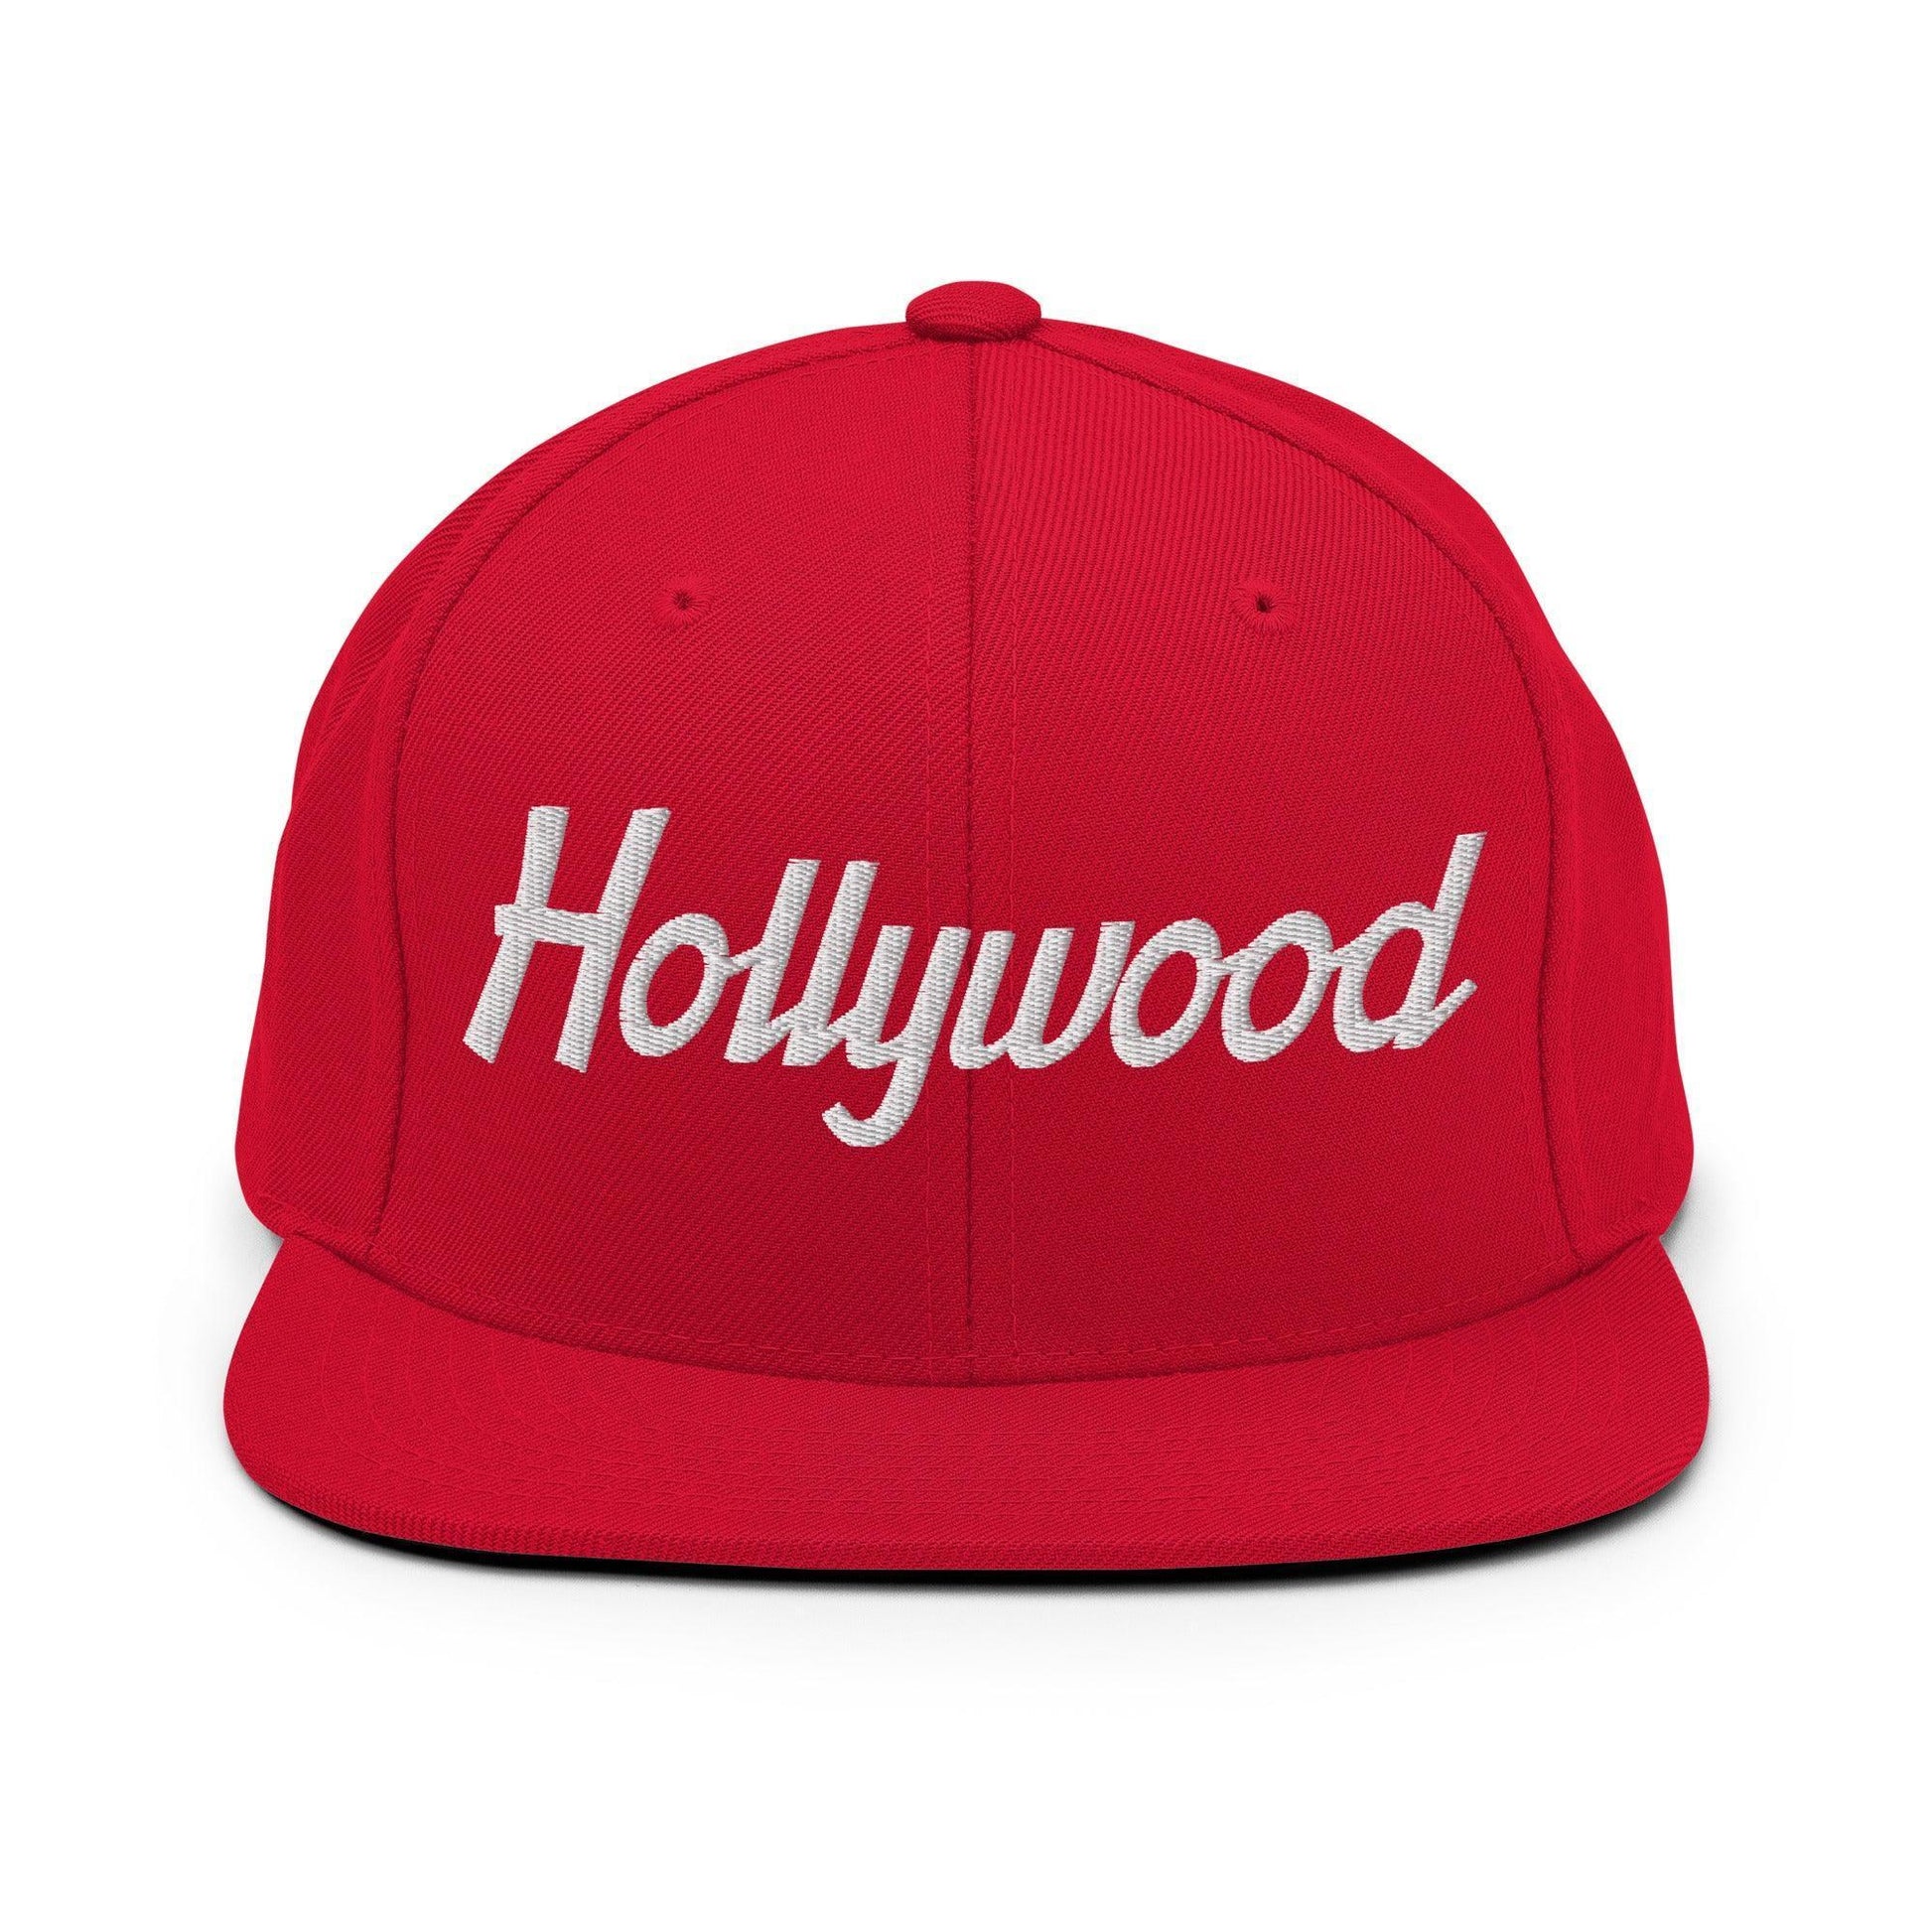 Hollywood Script Snapback Hat Red